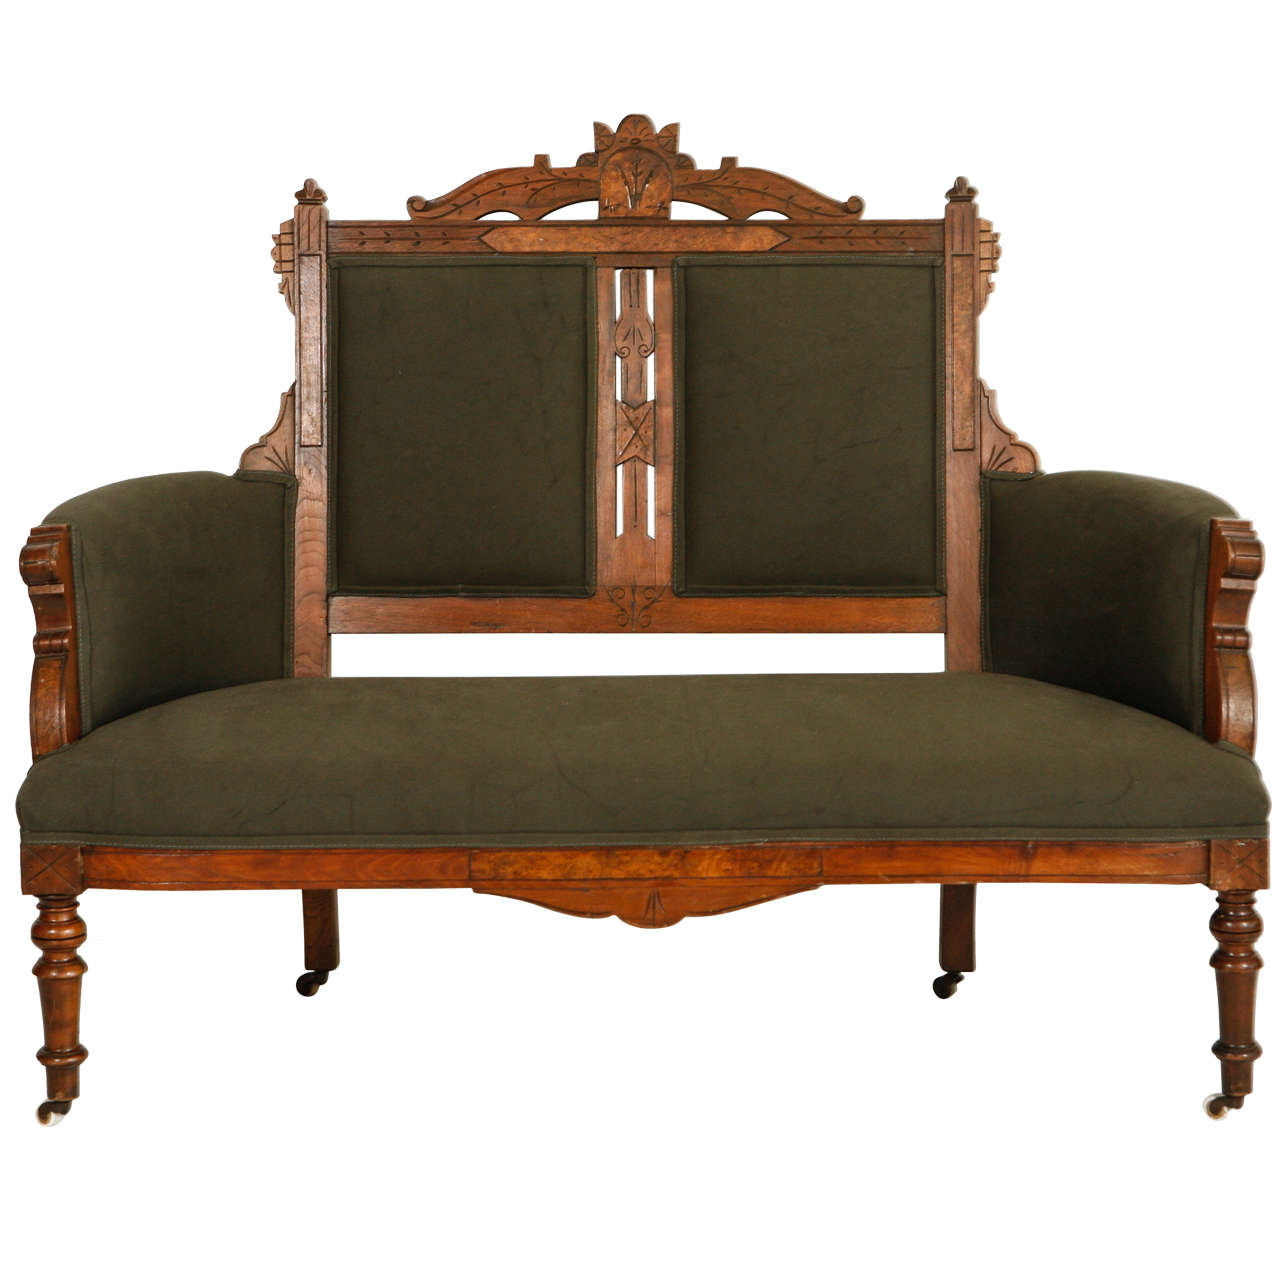 Carved Edwardian Settee in Army Green Canvas